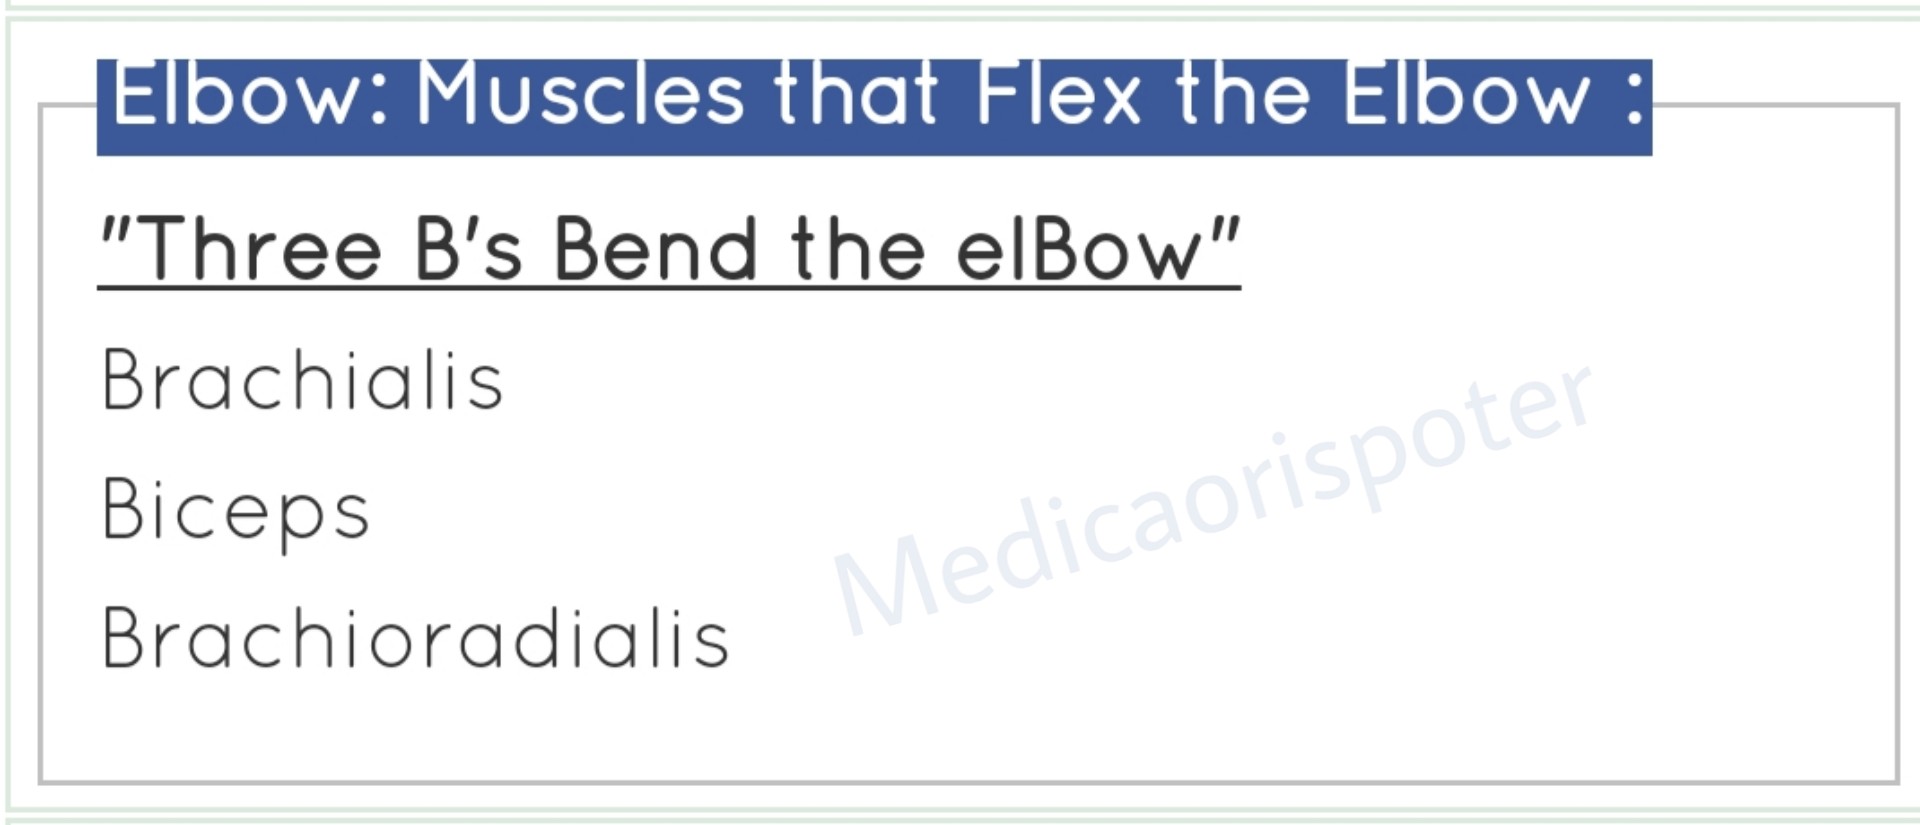 Muscles that Flex the Elbow